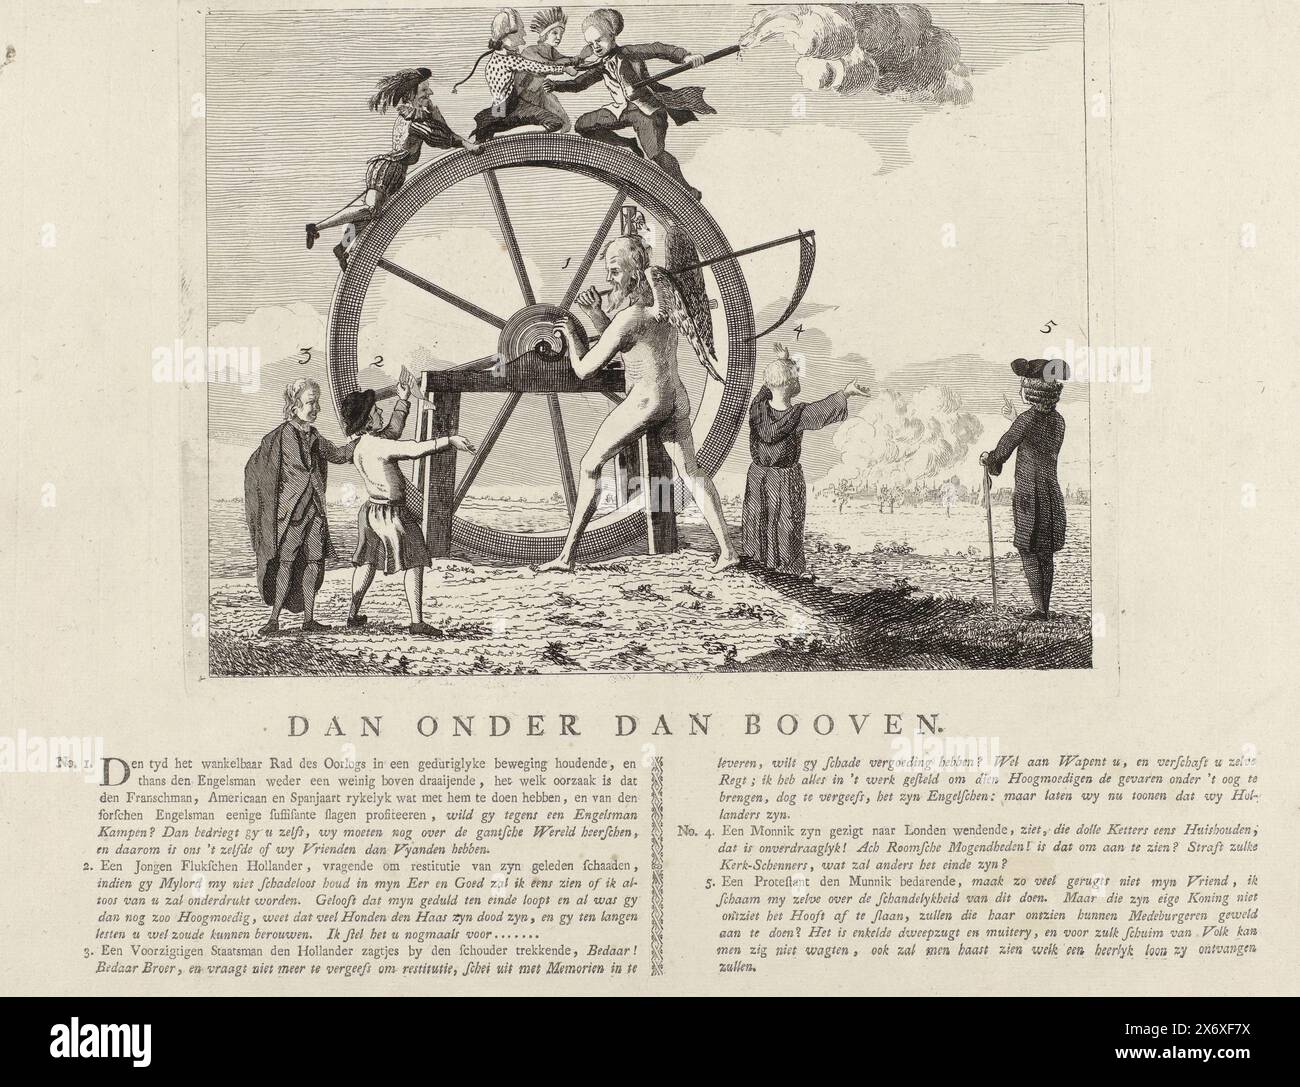 Cartoon with the British problems on the Wheel of Time ca. 1780, Dan Onder dan Booven (title on object), Cartoon on the British problems at home and abroad, ca. 1780. De Tijd turns on the Wheel of Fortune where at the top England is fighting with America and France. A Dutchman wants restitution for damage suffered, but is urged to calm down by the Statesman. A monk laments the so-called Gordon Riots in London in the background. On the sheet below the plate an explanation of the numbers 1-5., print, print maker: anonymous, Northern Netherlands, 1780, paper, etching, engraving, letterpress Stock Photo